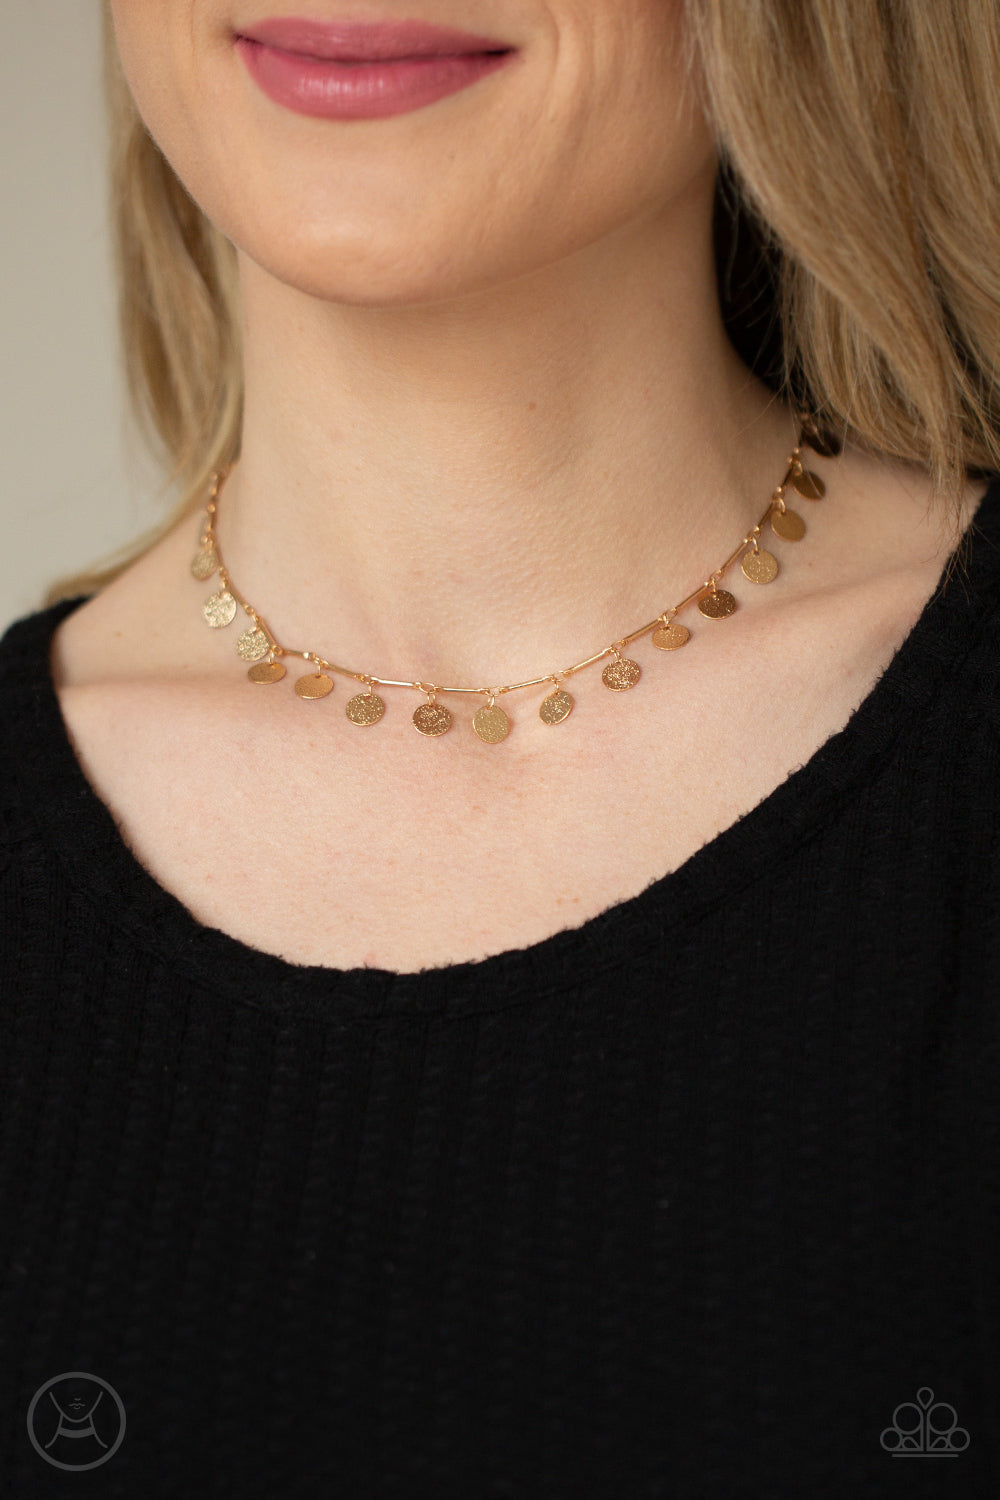 Hammered gold discs swing from interconnected gold bars around the neck, creating a shimmery fringe. Features an adjustable clasp closure.  Sold as one individual choker necklace. Includes one pair of matching earrings.